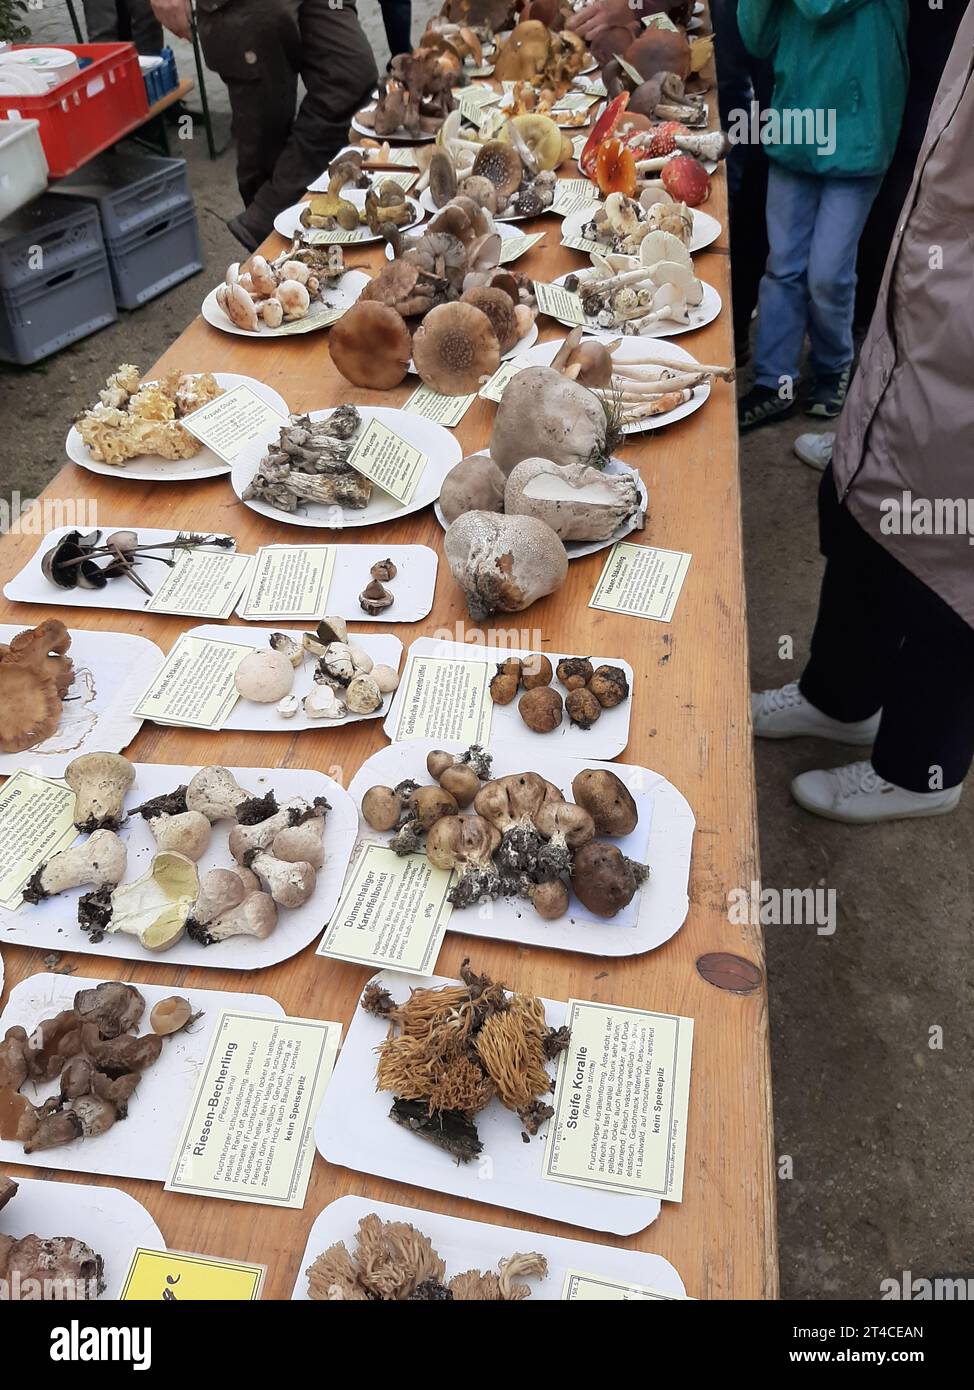 mushrooms - Ppesentation of different species with informations, Germany, Saxony Stock Photo